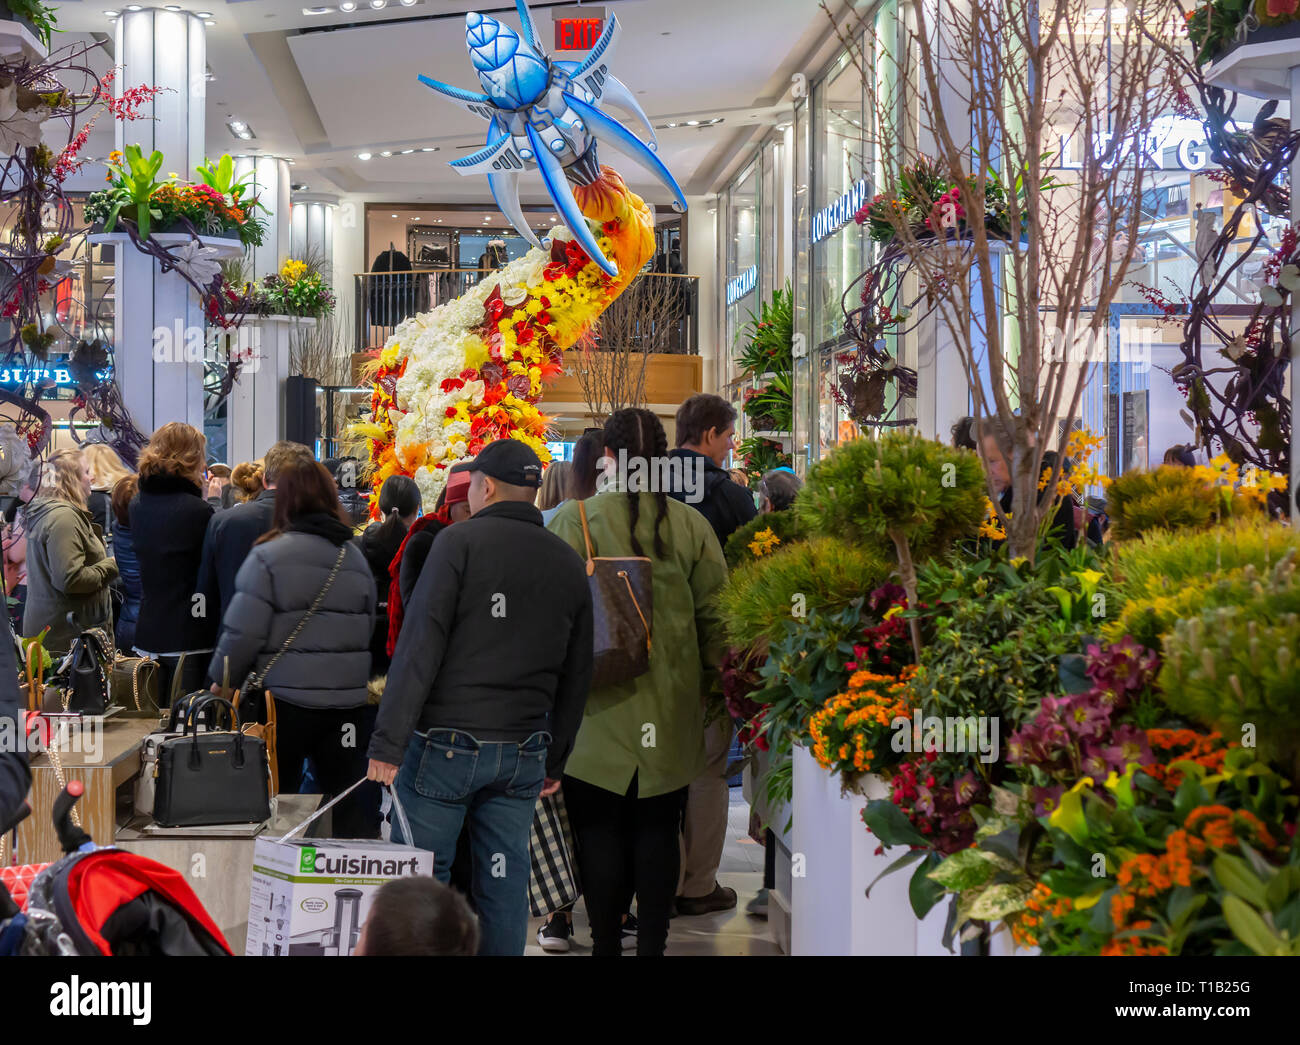 Macy's 2019 Flower Show Opens March 24 in Herald Square